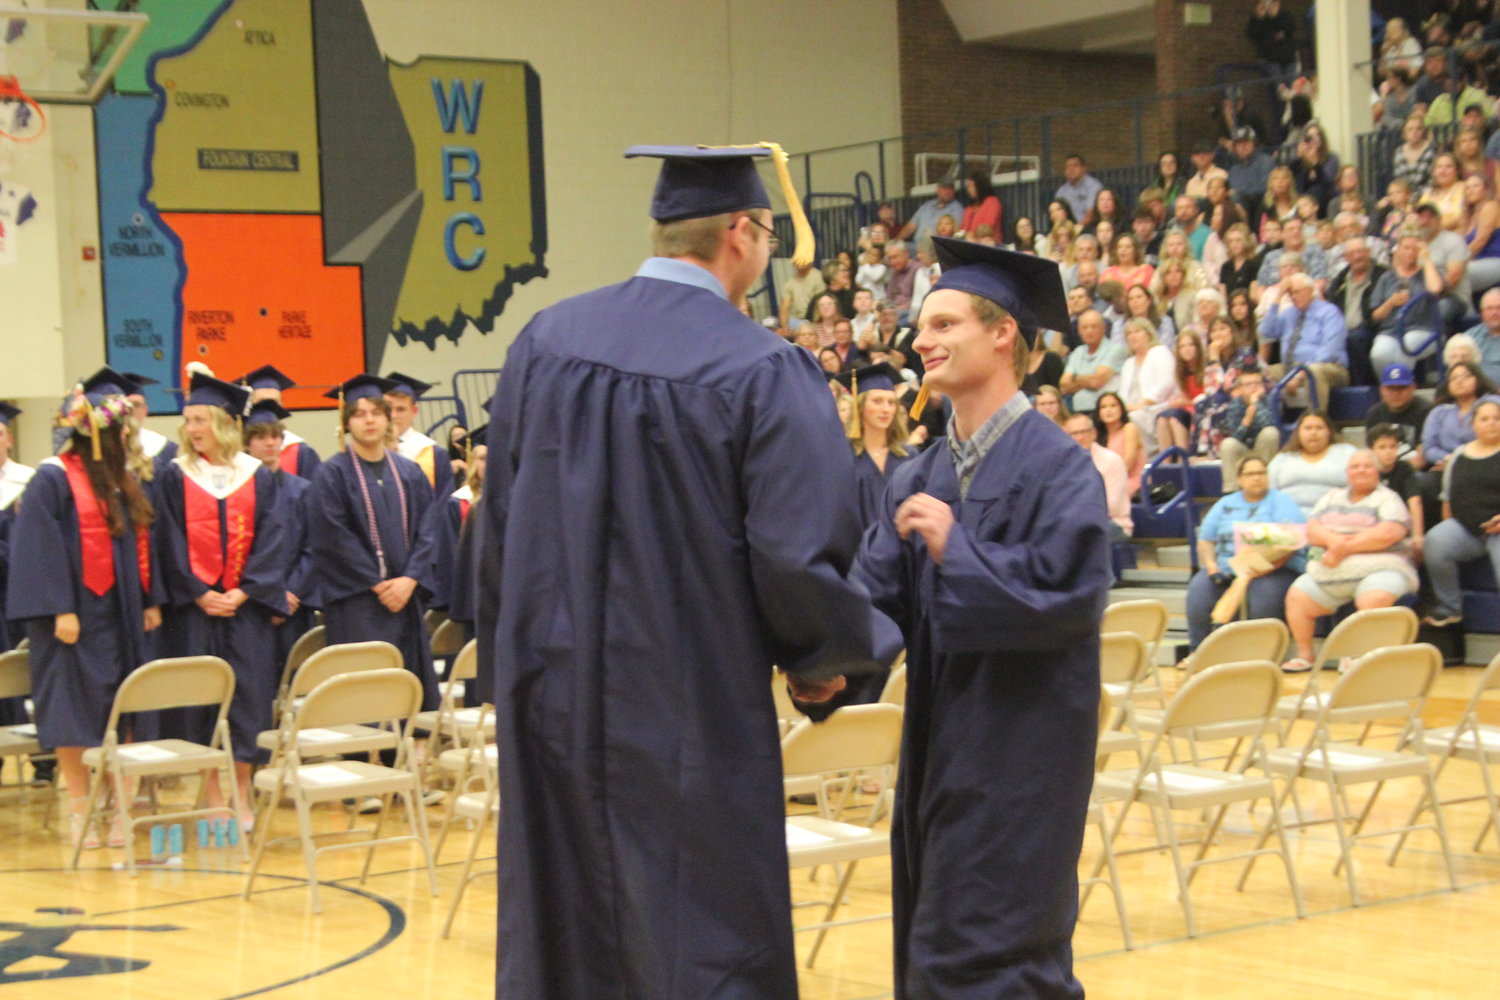 Gavin Kiger and Nathan Newell shake hands while walking into commencement.